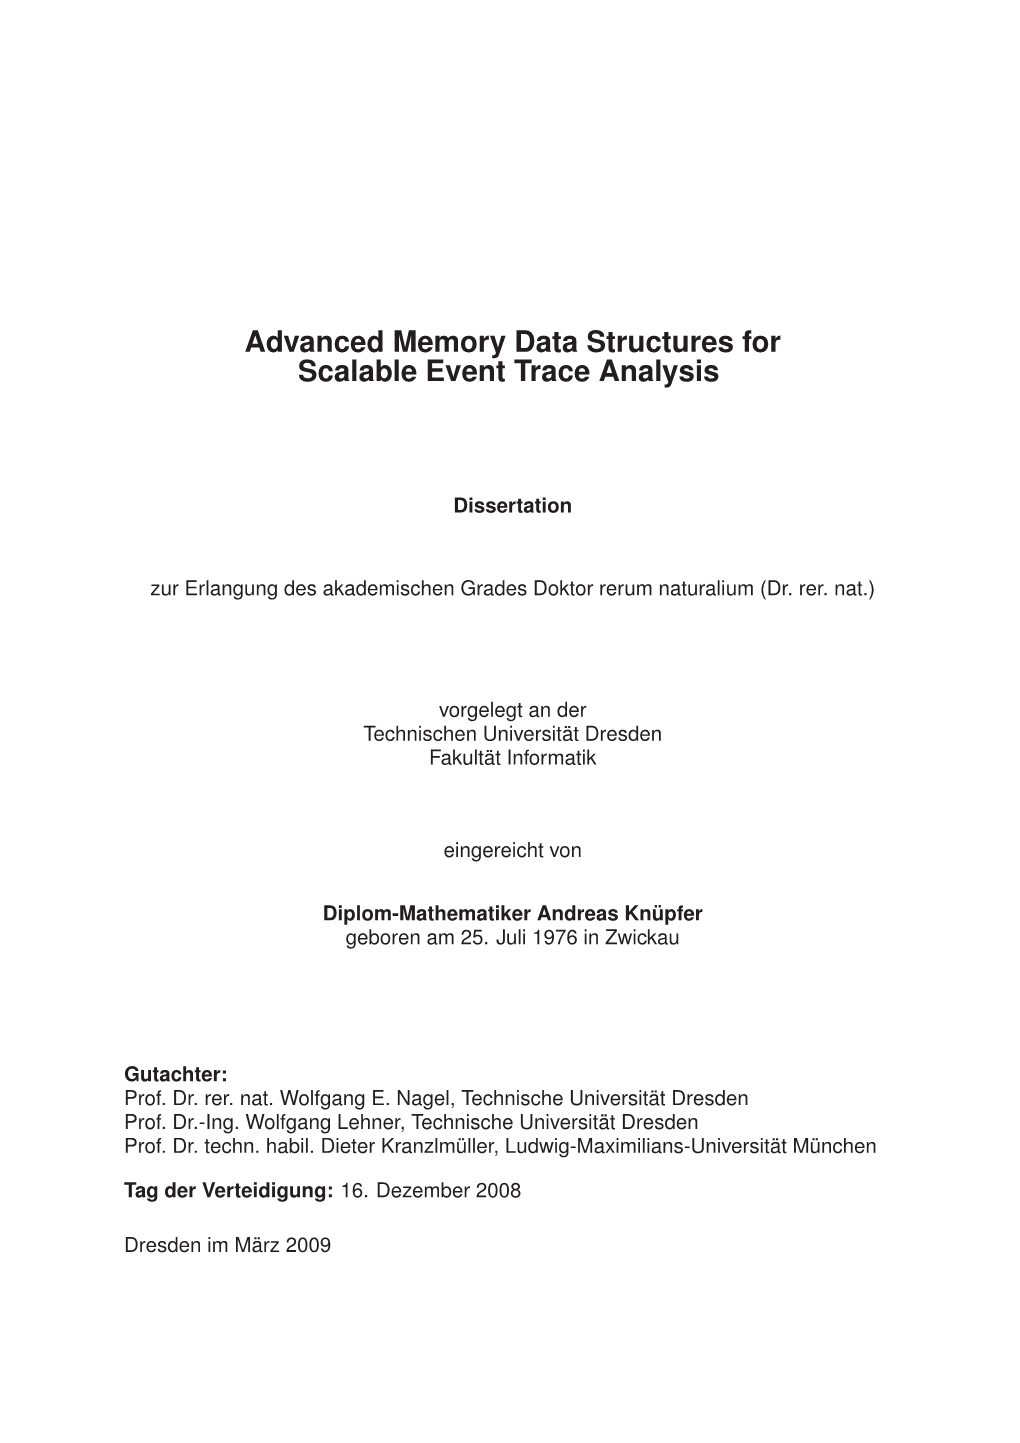 Advanced Memory Data Structures for Scalable Event Trace Analysis